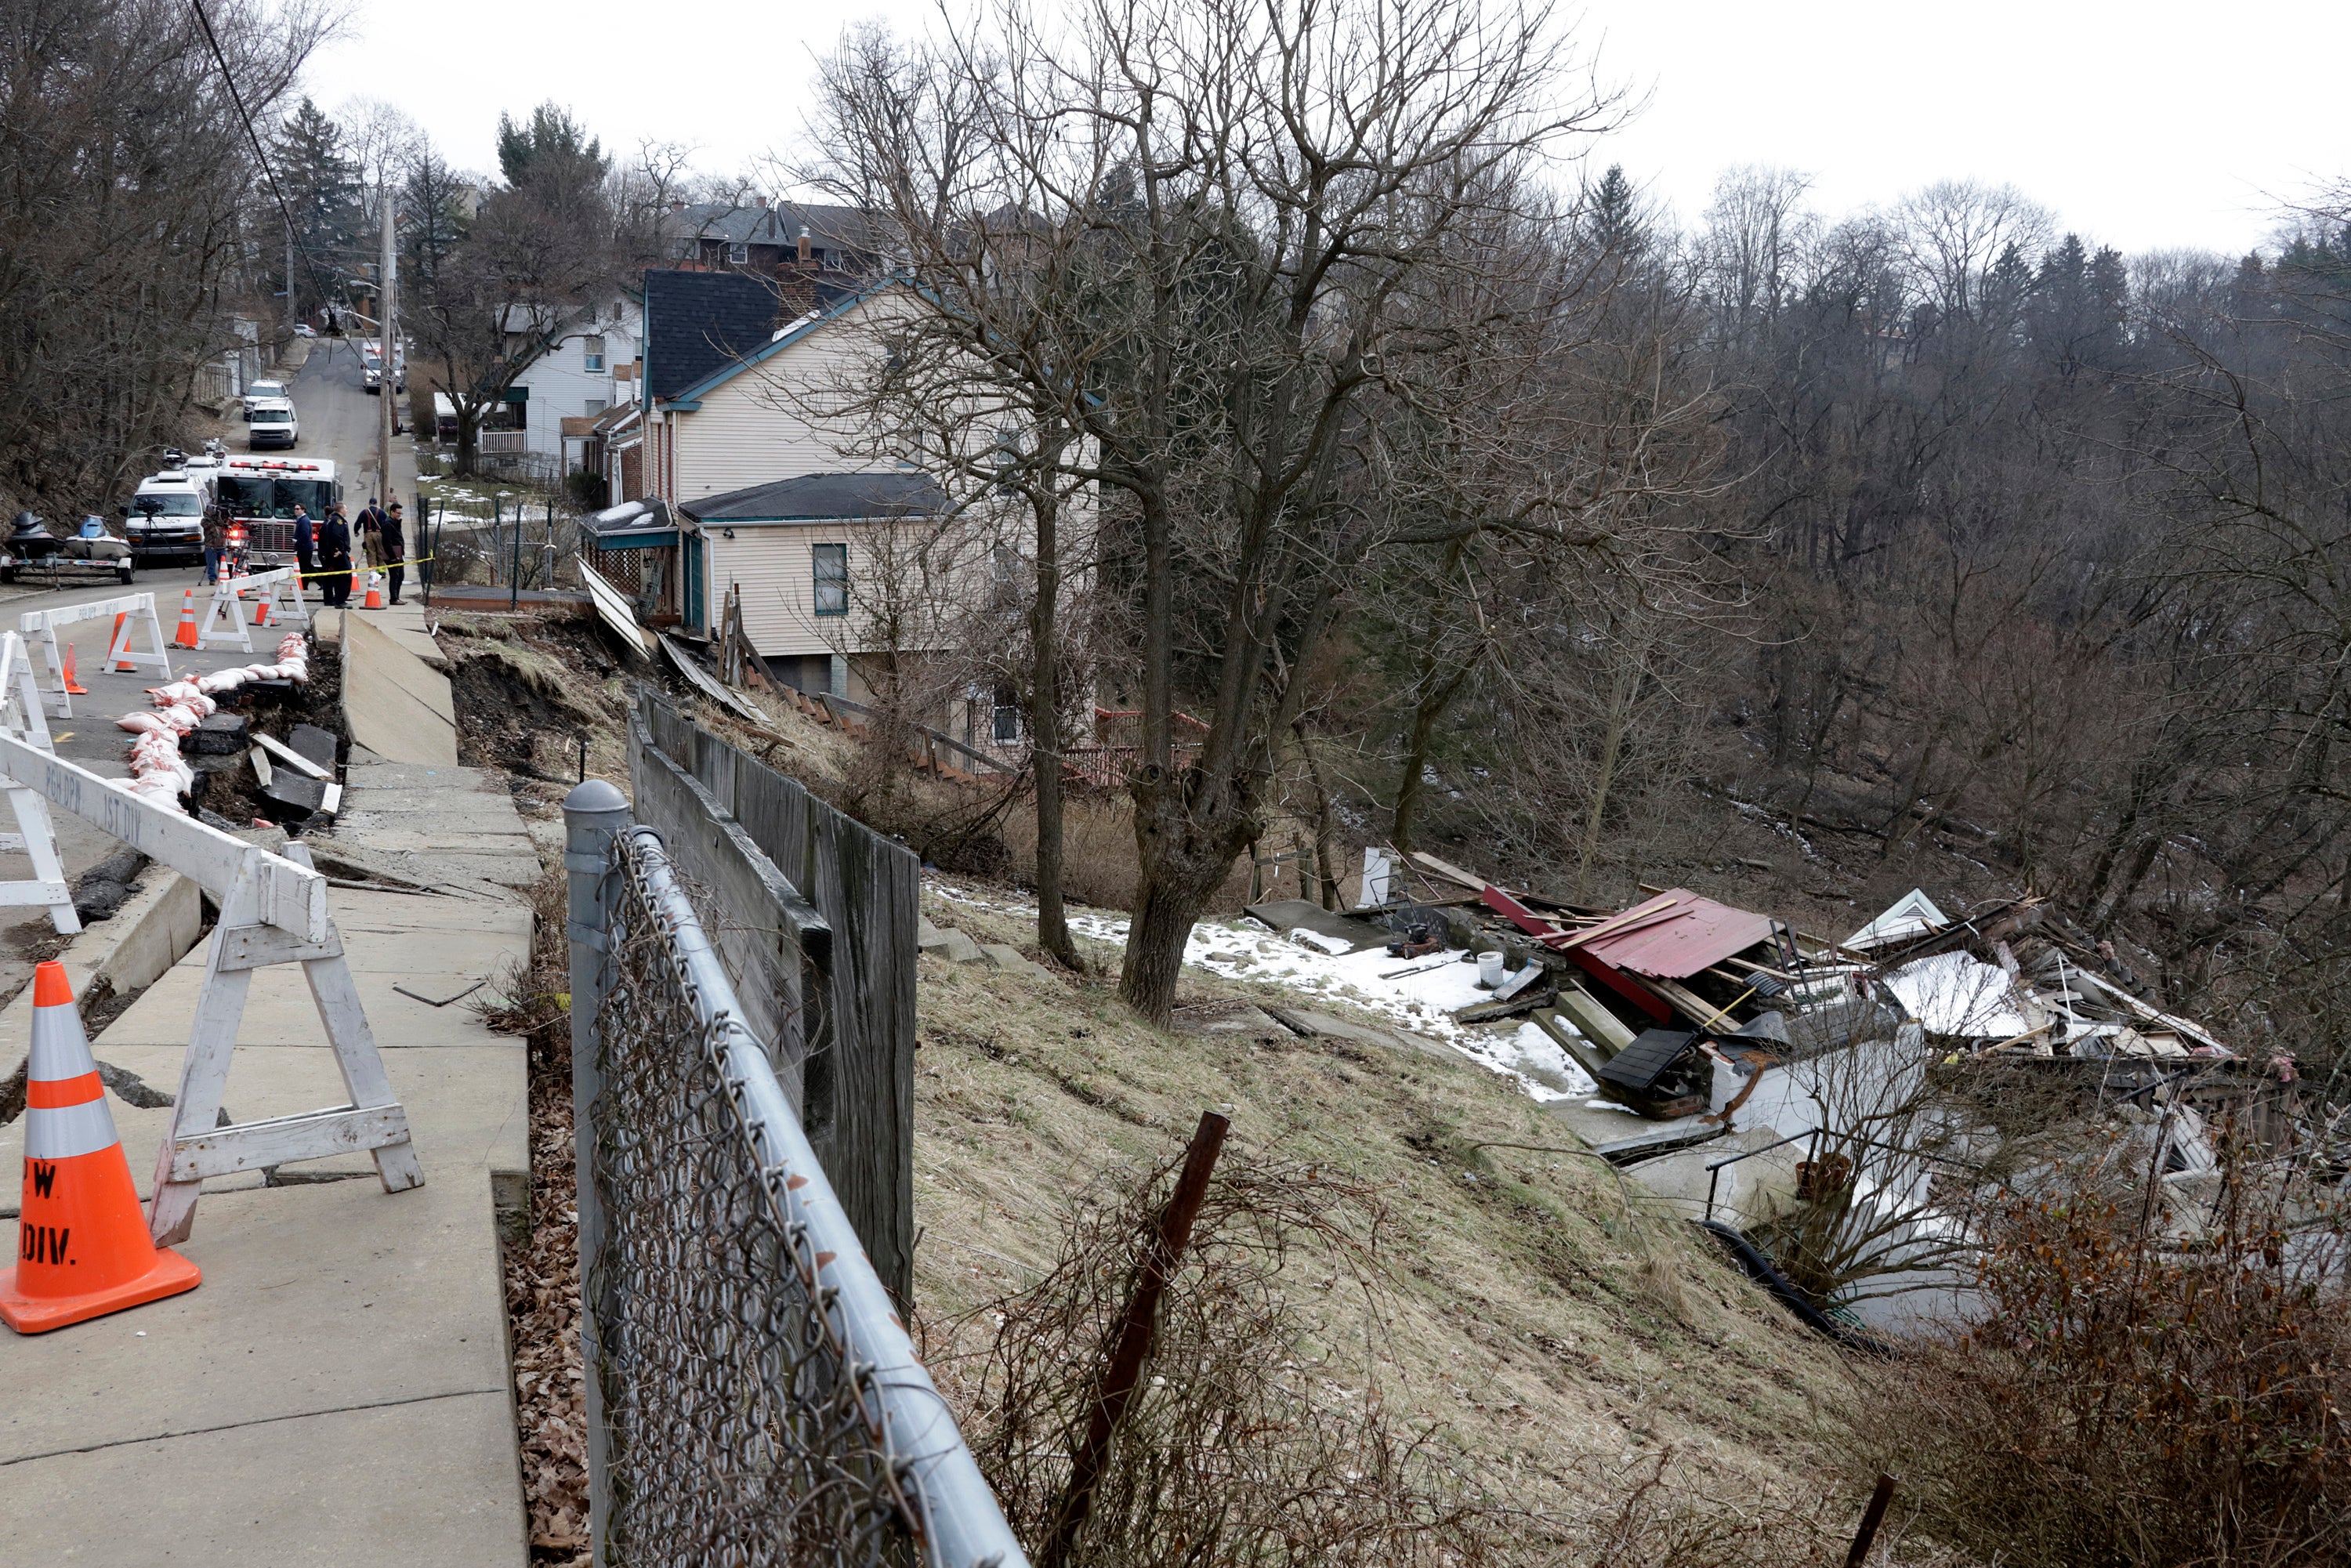 Pittsburgh Public Safety workers inspect a house that collapsed due to a landslide